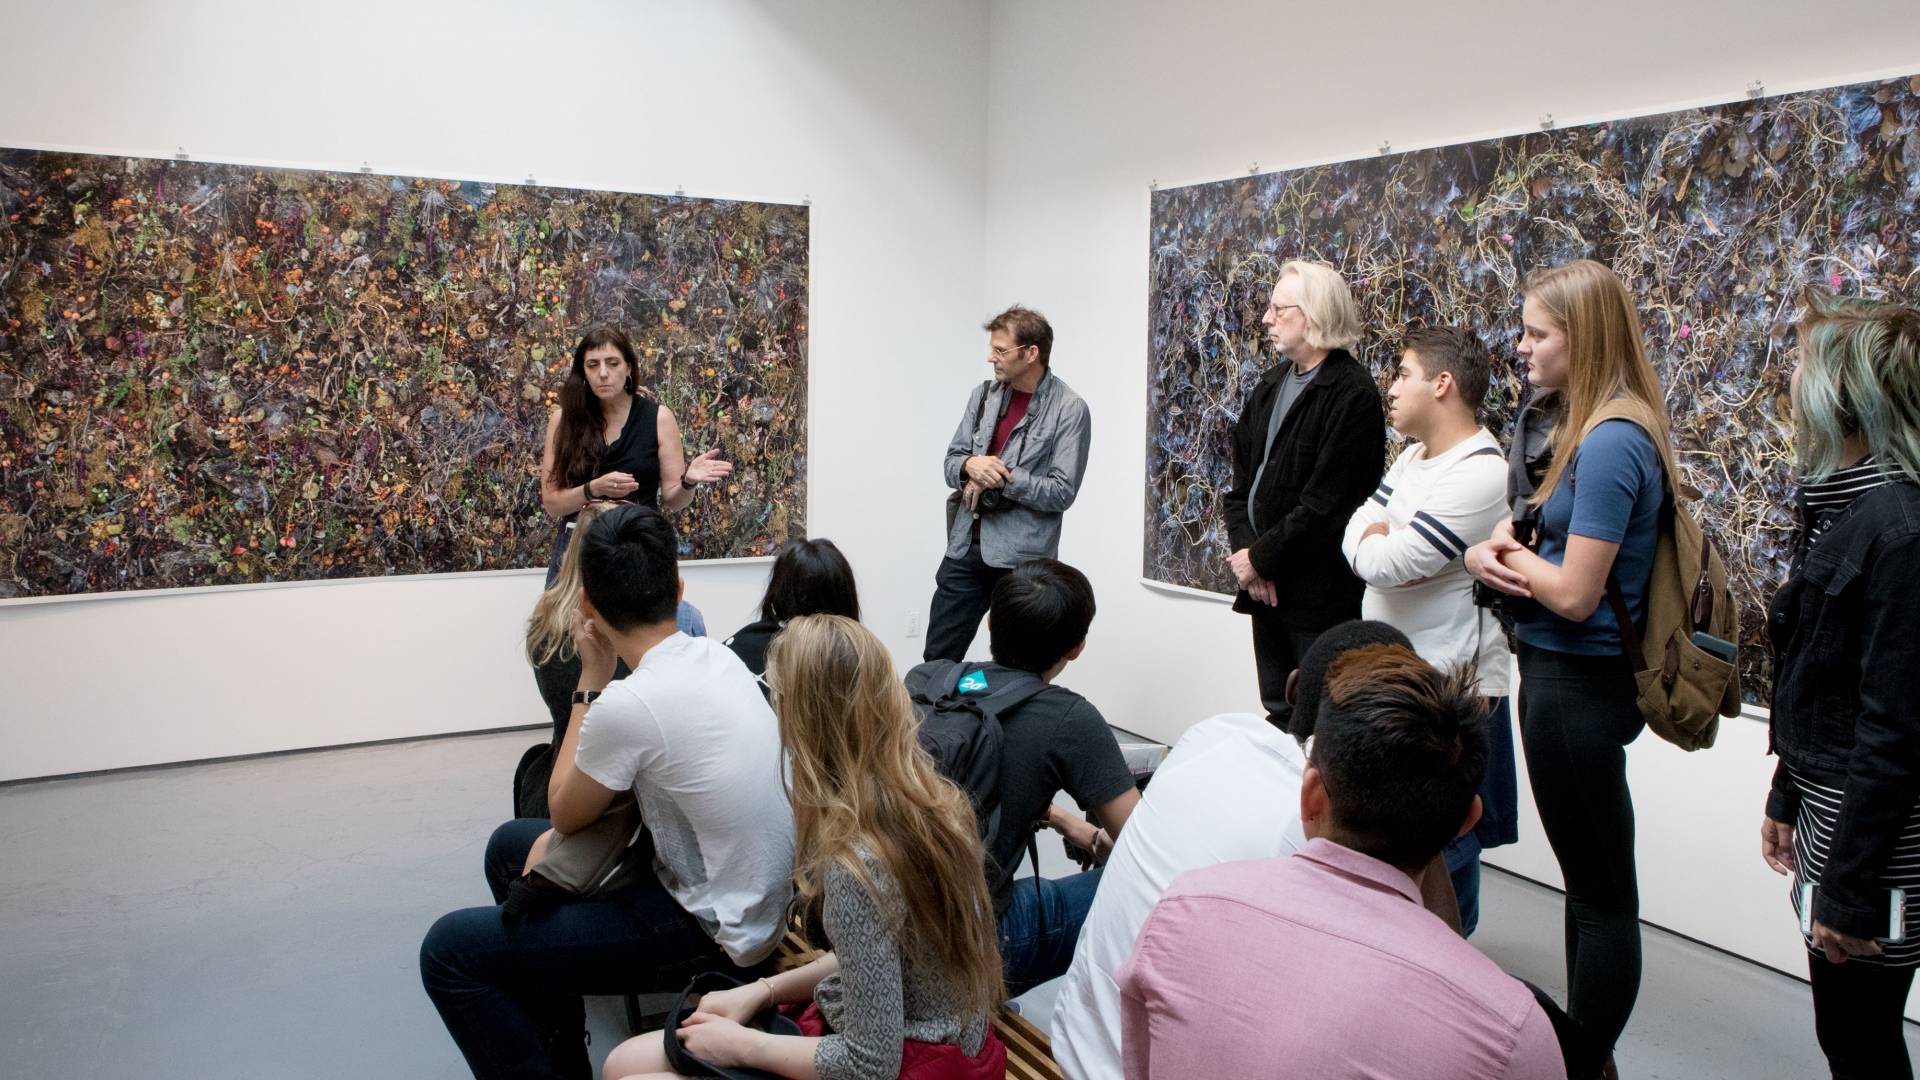 Artist discusses her work with students in New York gallery